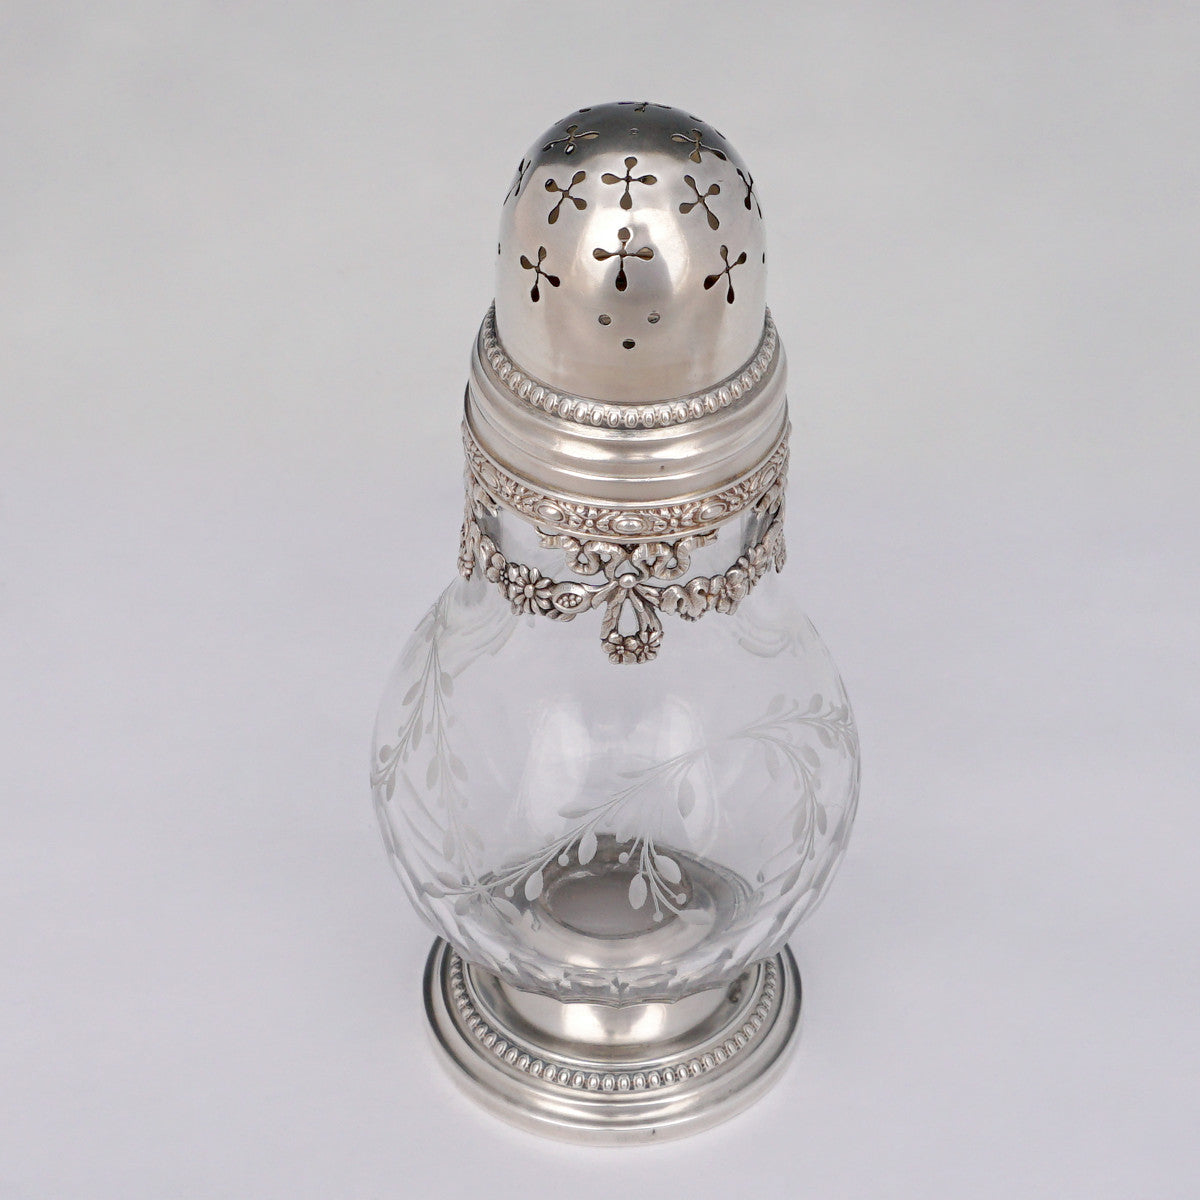 Antique French Sterling Silver Crystal Sugar Shaker, Caster, Muffineer